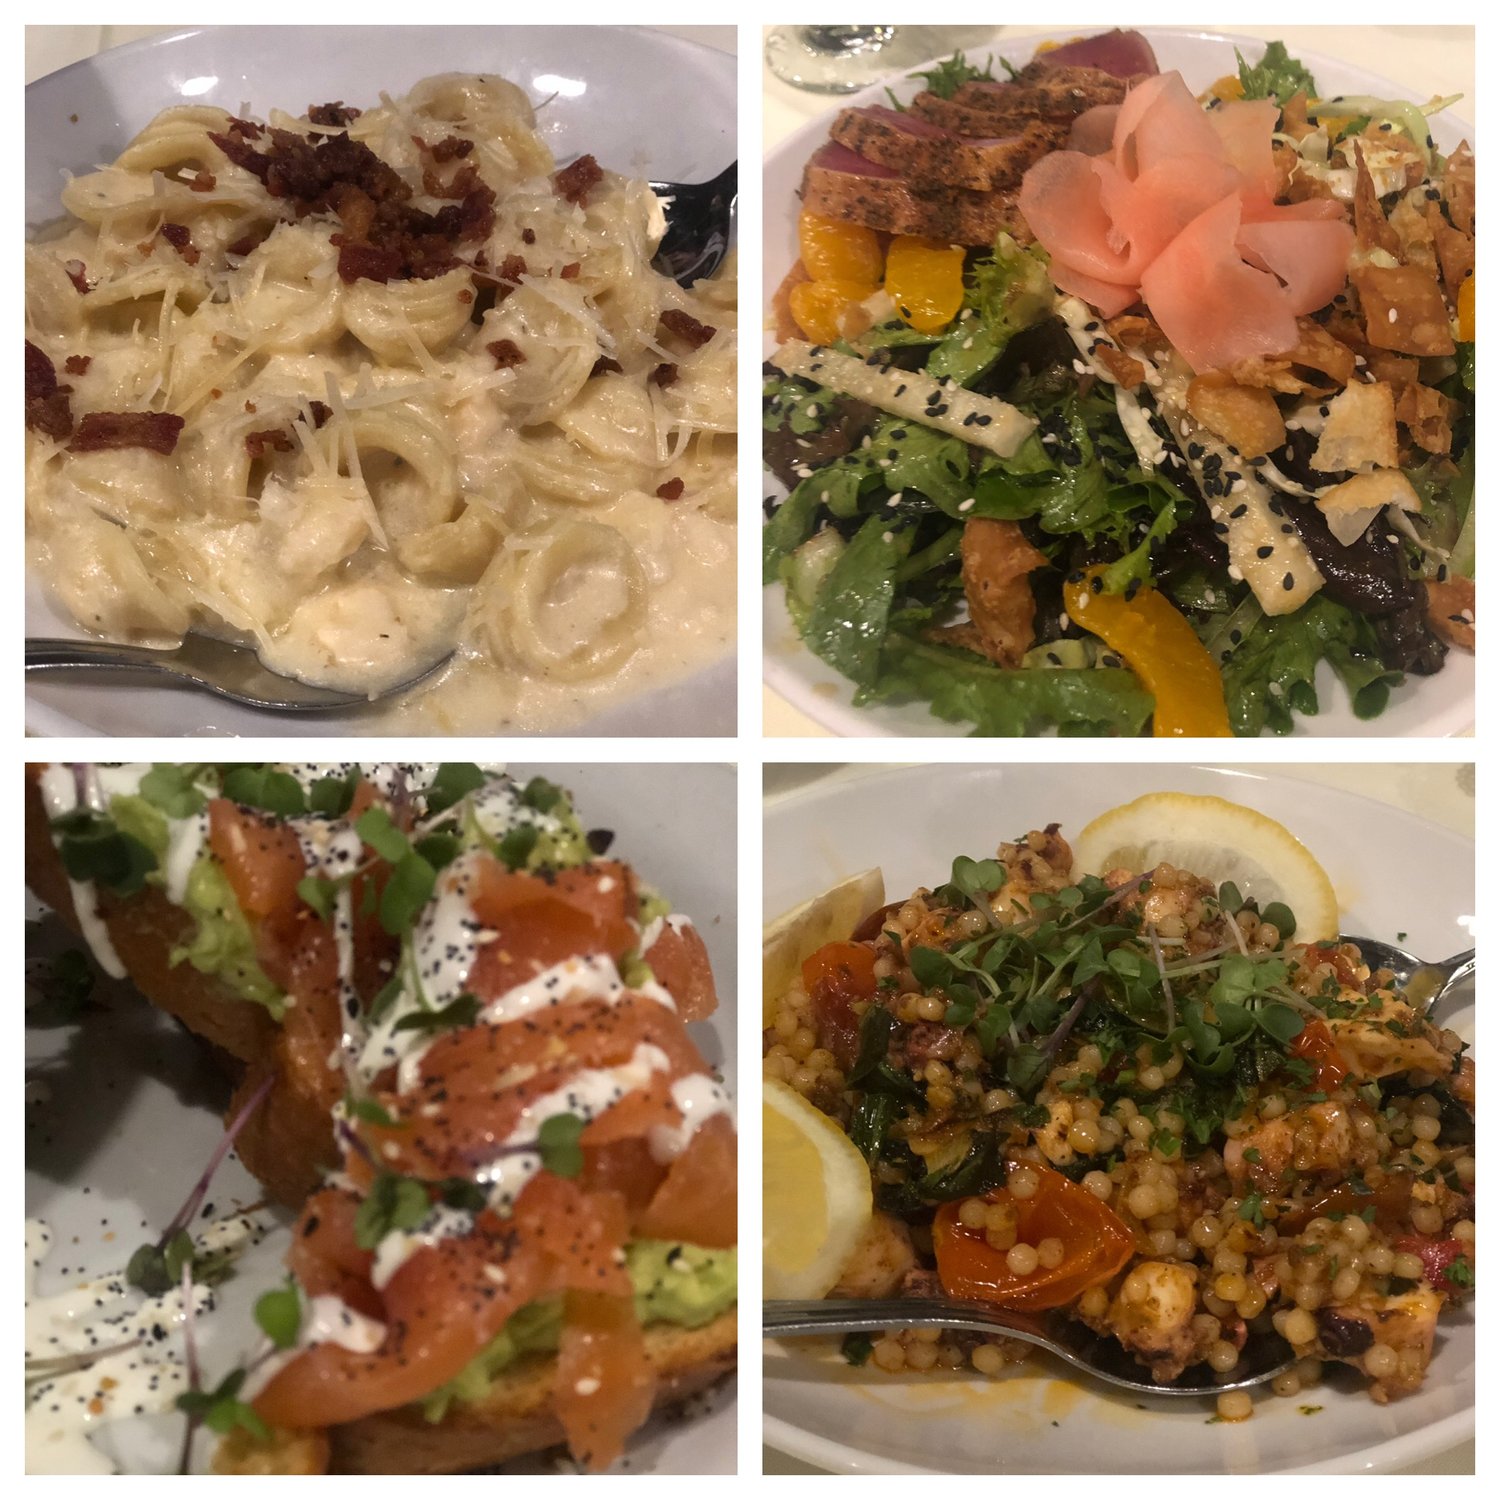 Lobster Mac and cheese, tuna crunchy salad, smoked salmon avocado toast, grilled octopus couscous and more!